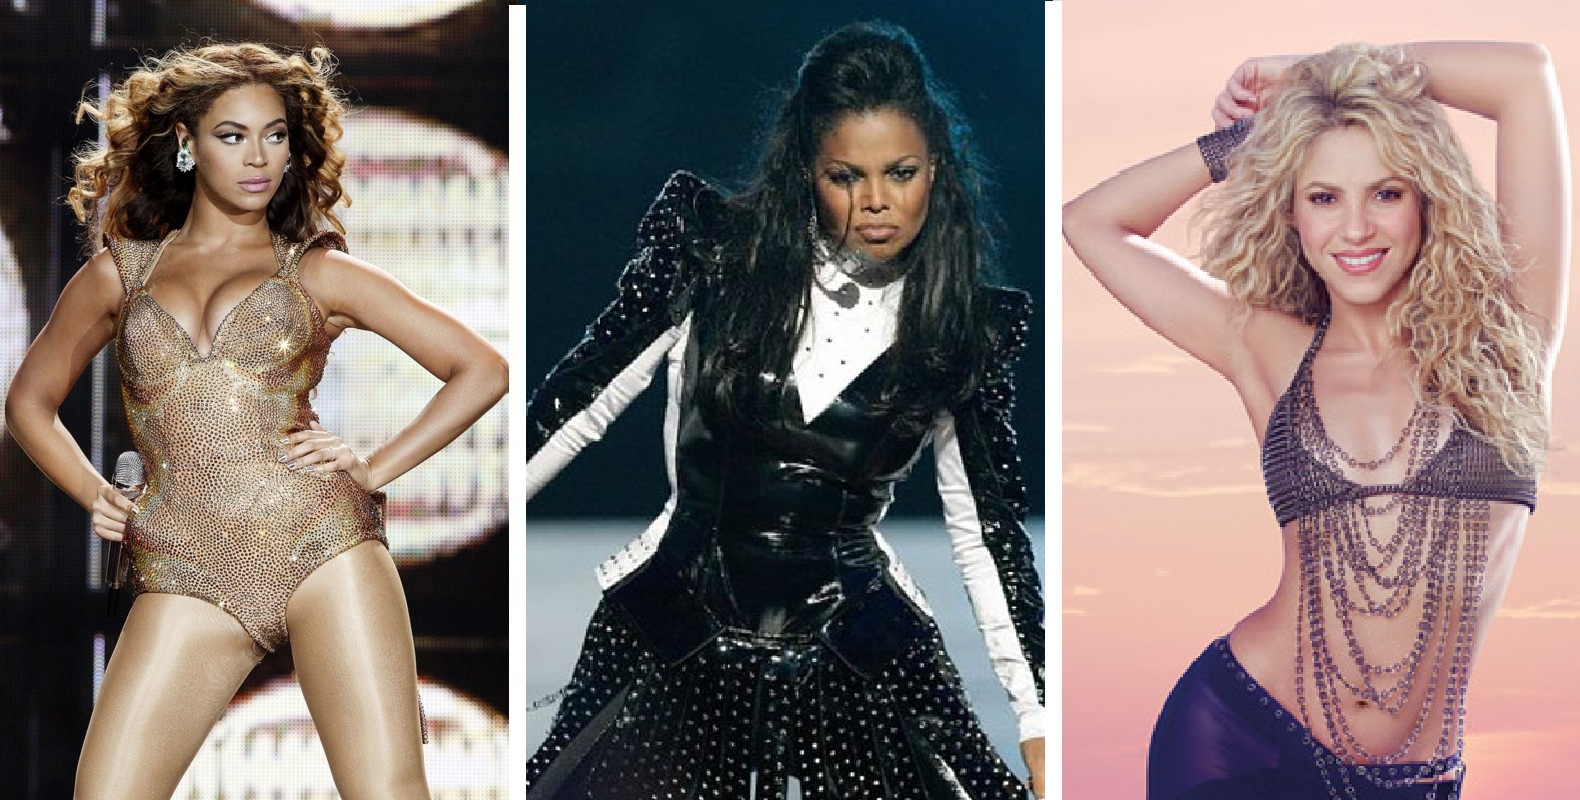 POLL: Janet, Madonna, Beyonce or Shakira – Who’s The Best Female Dancer? Vote here!